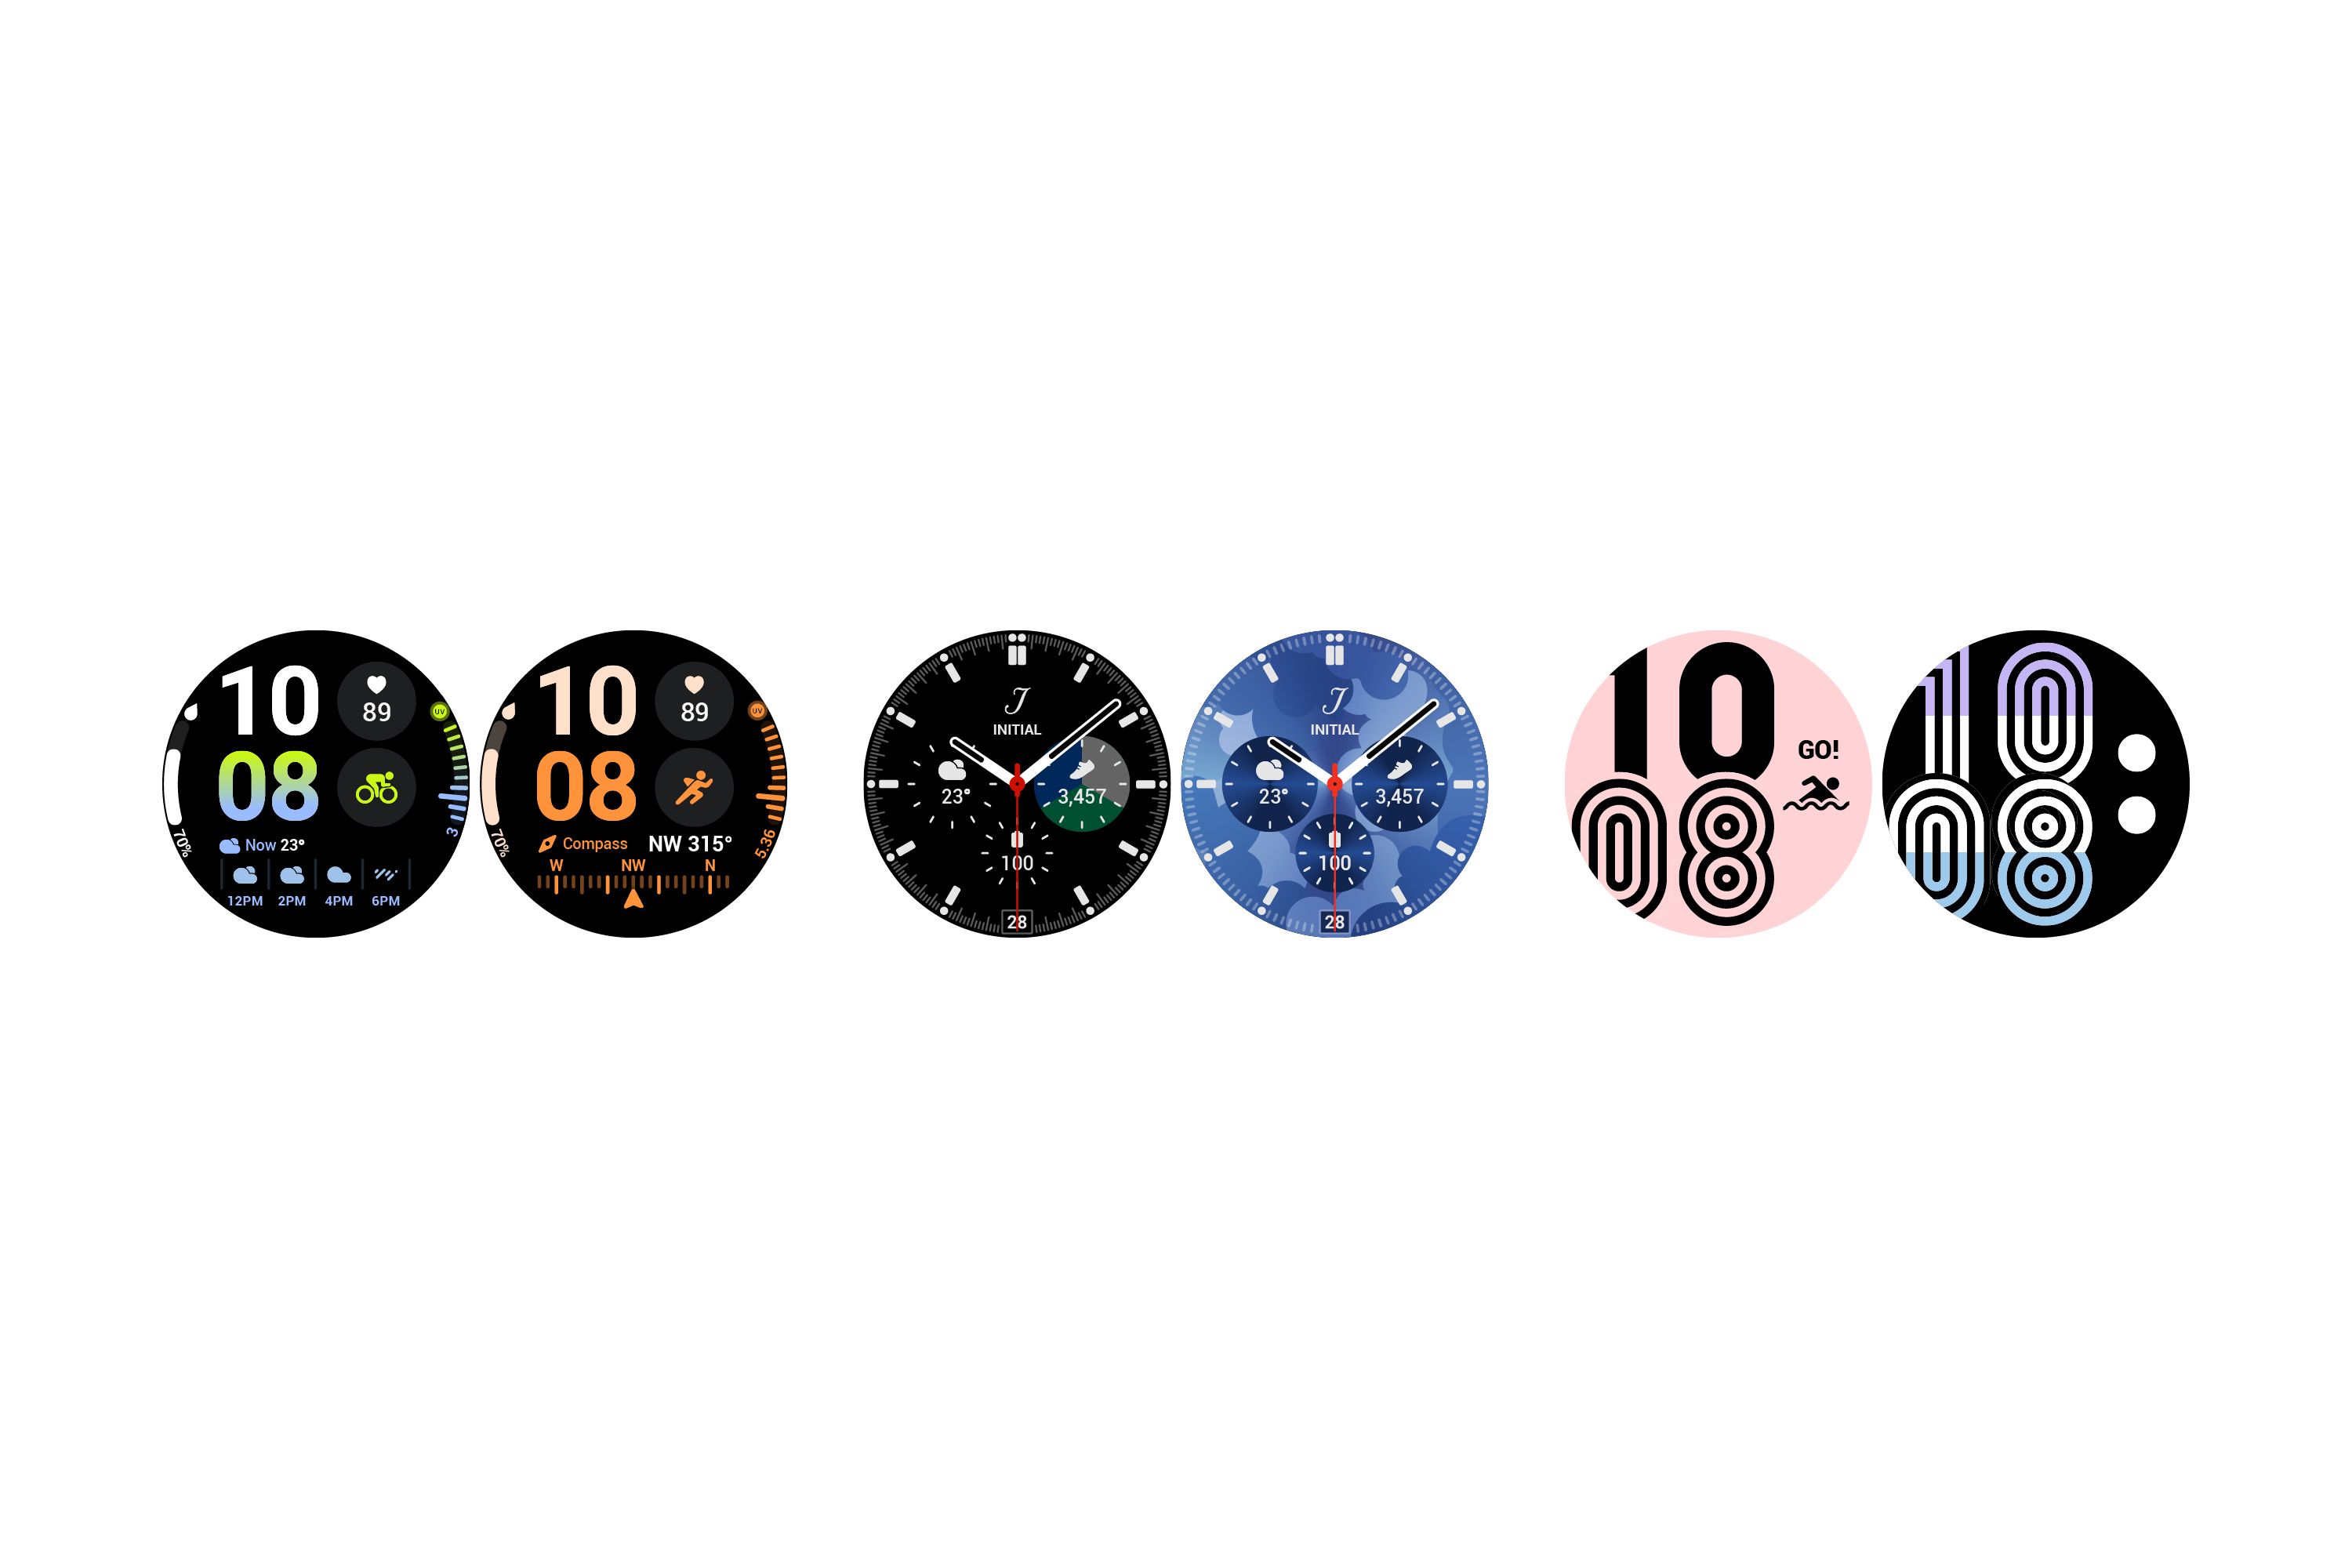 One UI Watch 4.5 watch faces